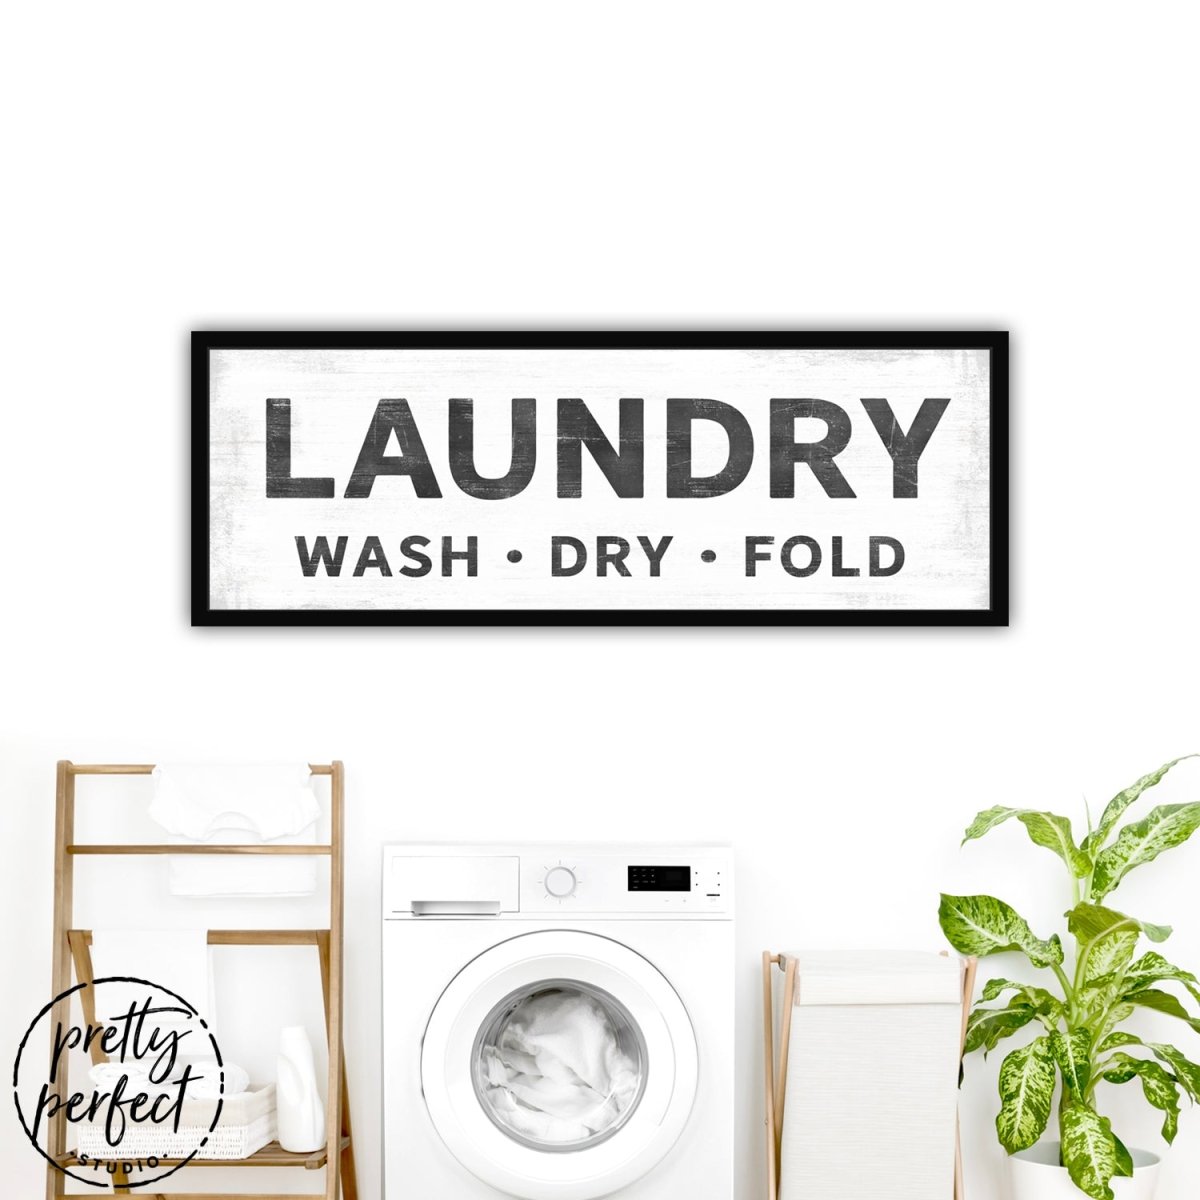 Laundry Sign Above Washing Machine - Wash, Dry, and Fold - Pretty Perfect Studio 